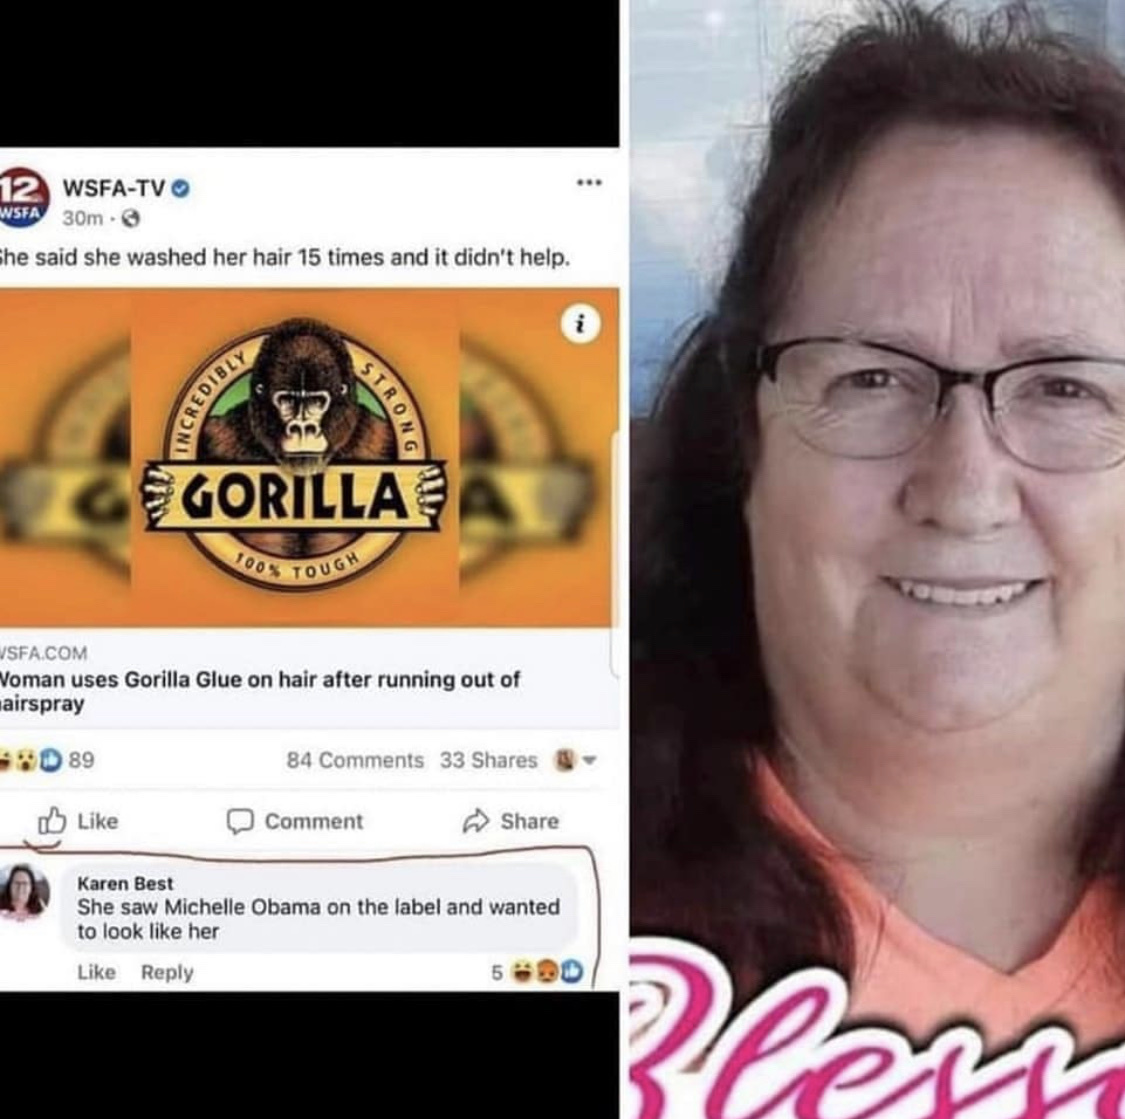 this woman looks like mashed potatoes made from a lab using the dna off of shreks ass hair - meme